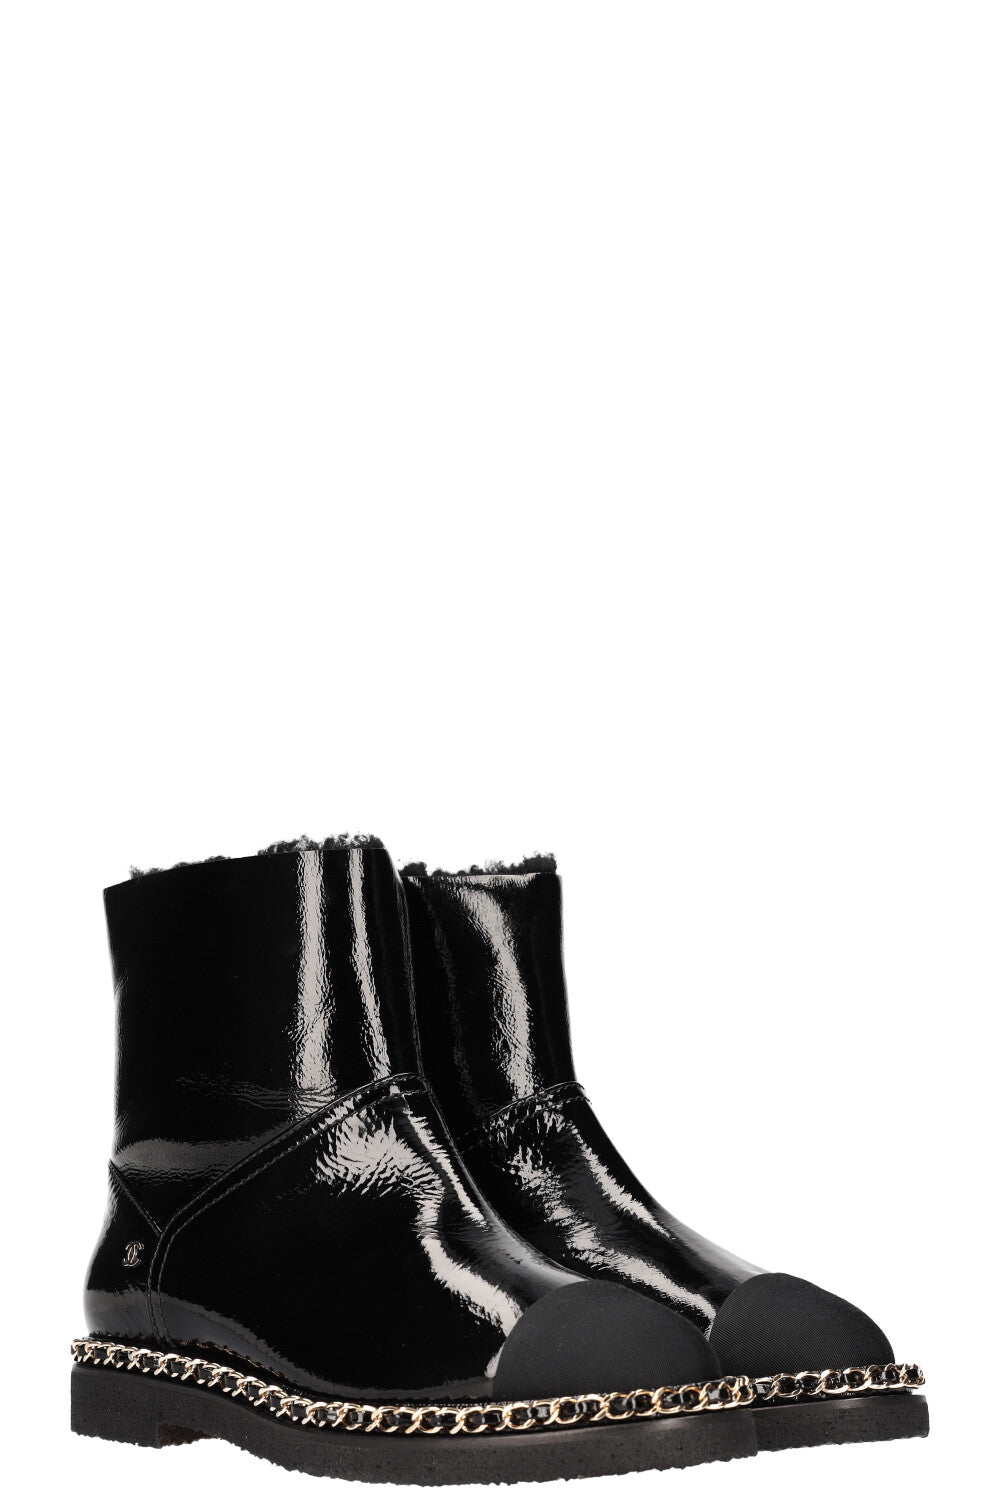 CHANEL Shearling Chain Boots Patent Black